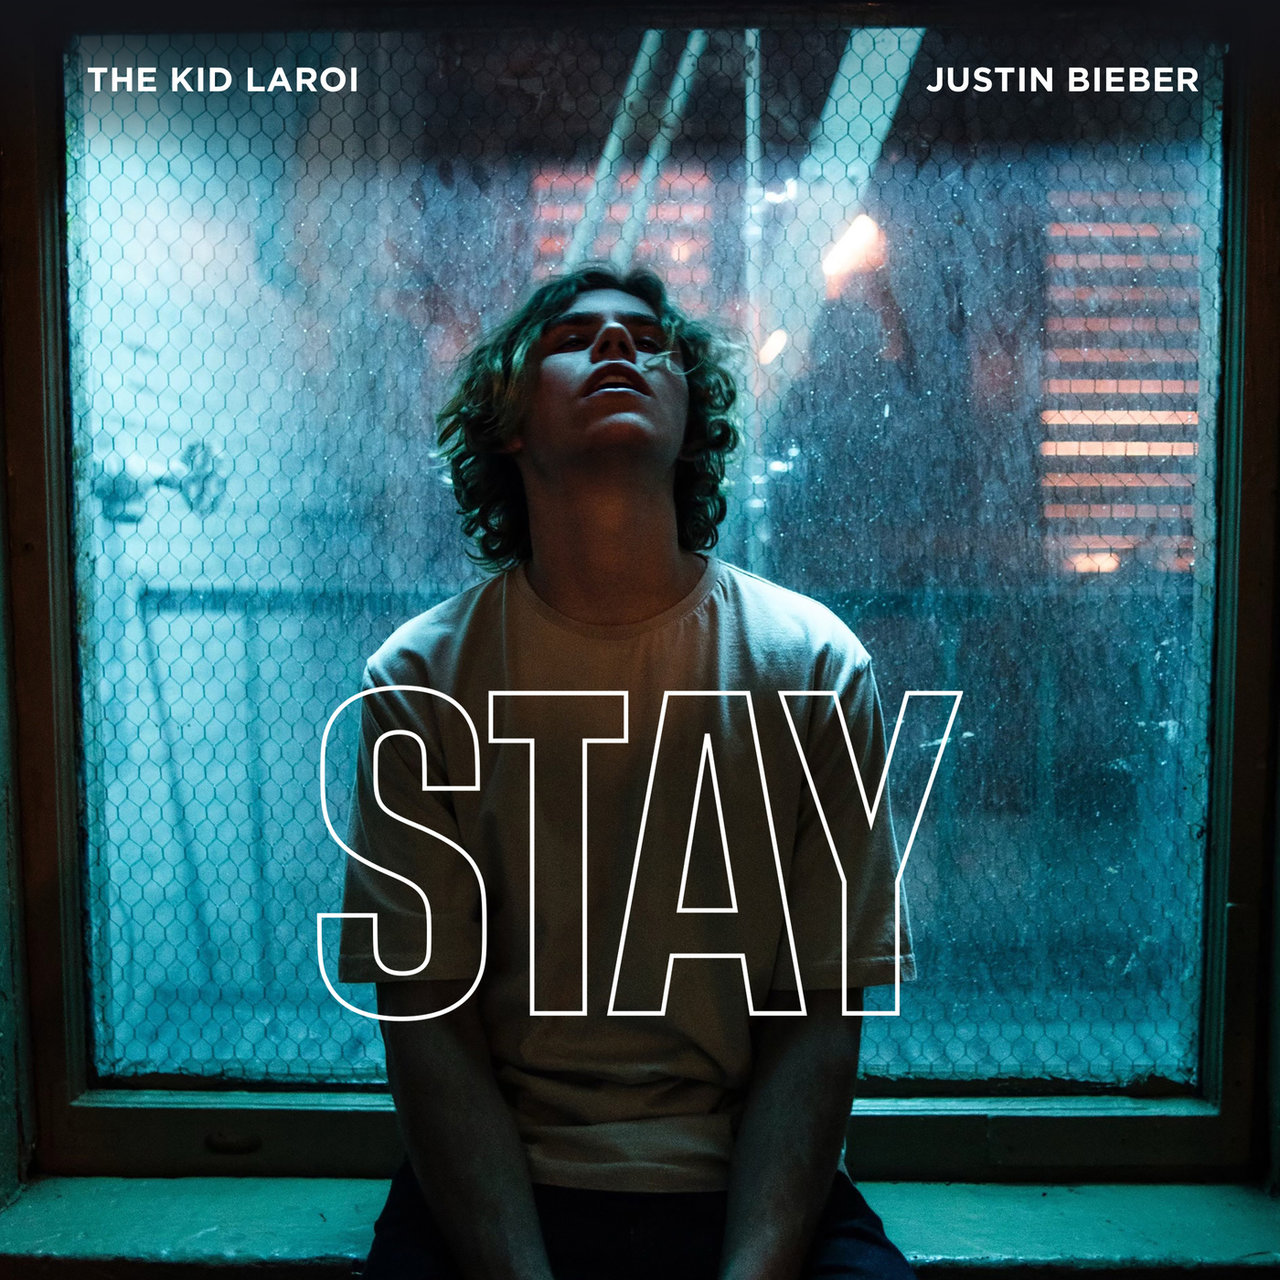 The Kid Laroi - Stay (ft. Justin Bieber) (Cover)